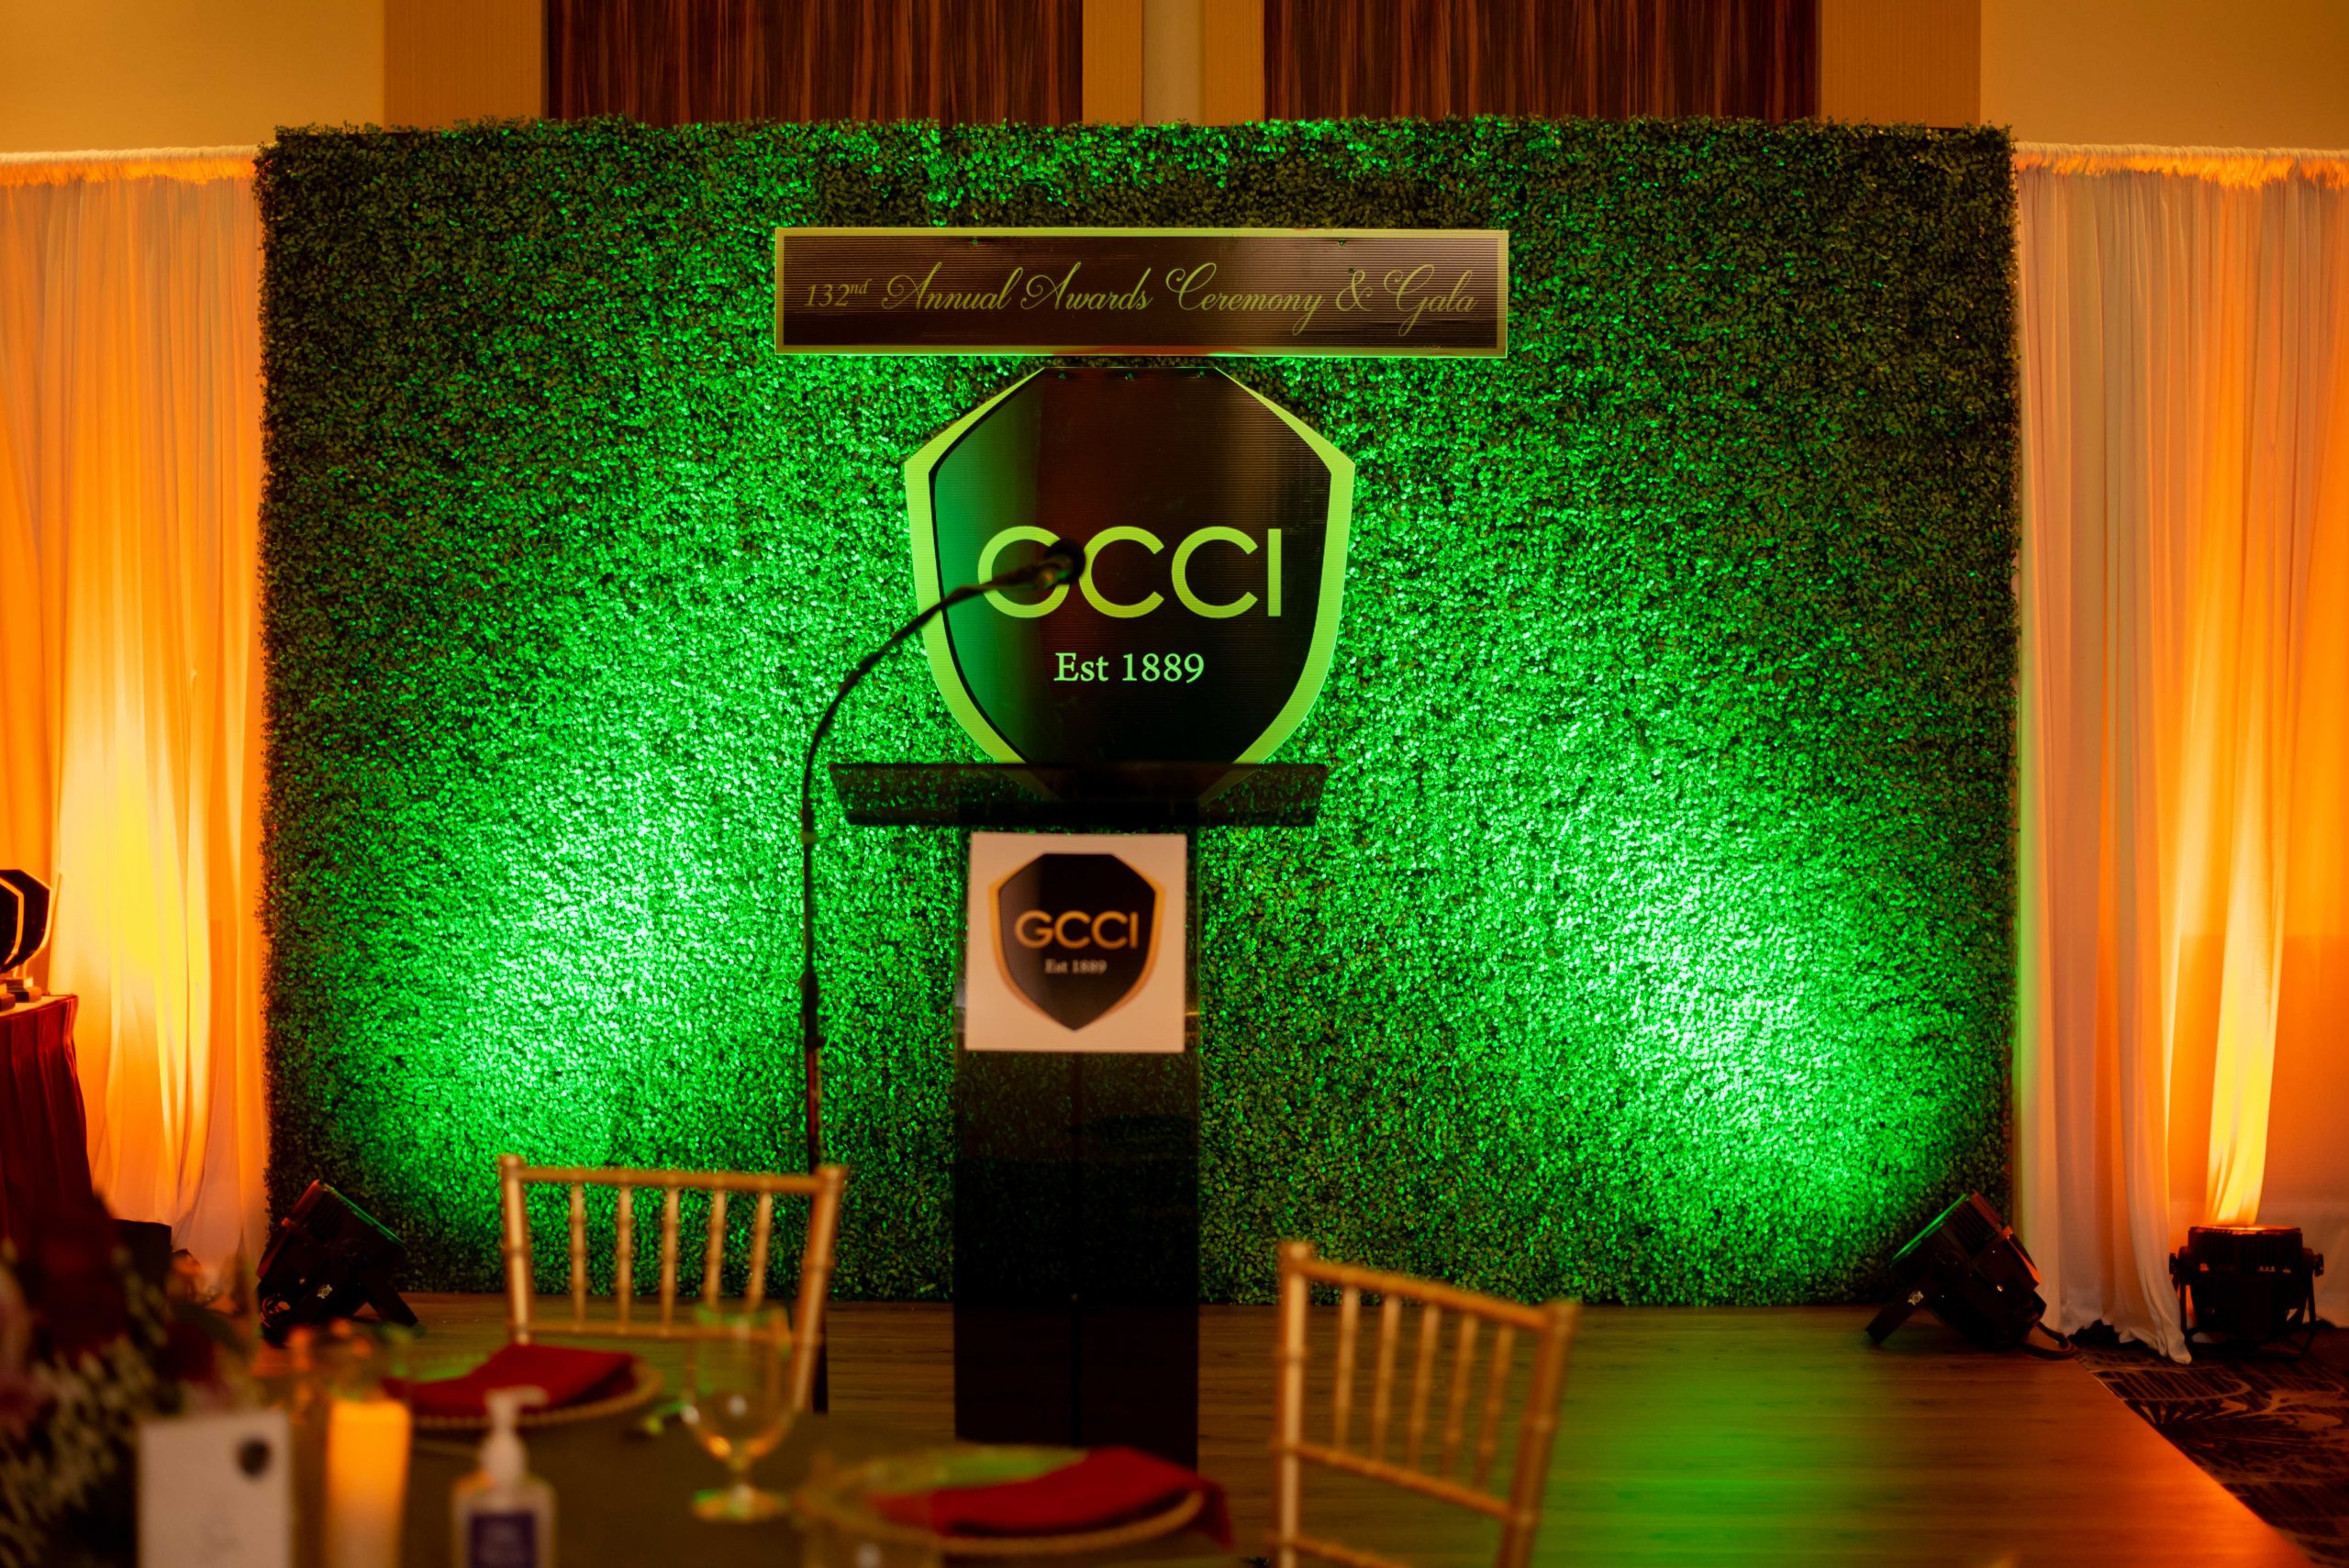 GCCI’s 132nd Annual Awards Presentation and Gala Dinner.